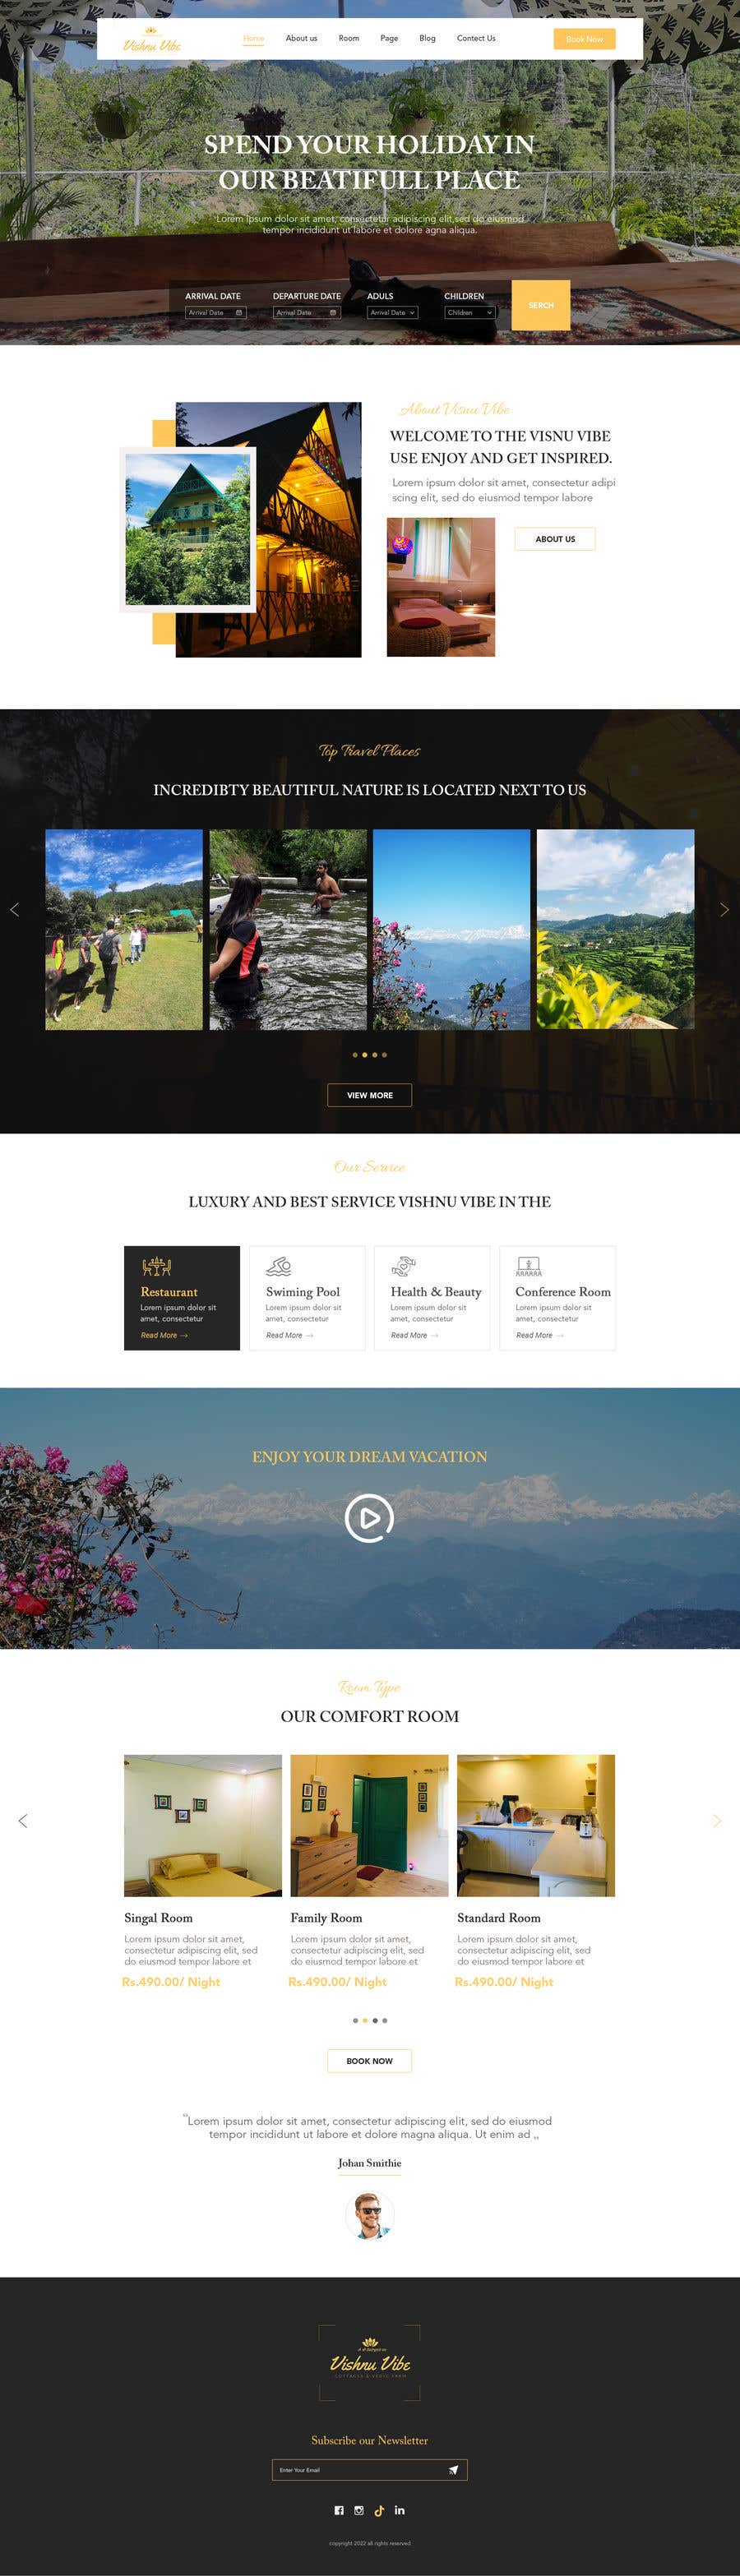 Bài tham dự cuộc thi #34 cho                                                 Website design 5 pages + short Video + basic graphic optimization for a luxury Homestay - Resort website
                                            